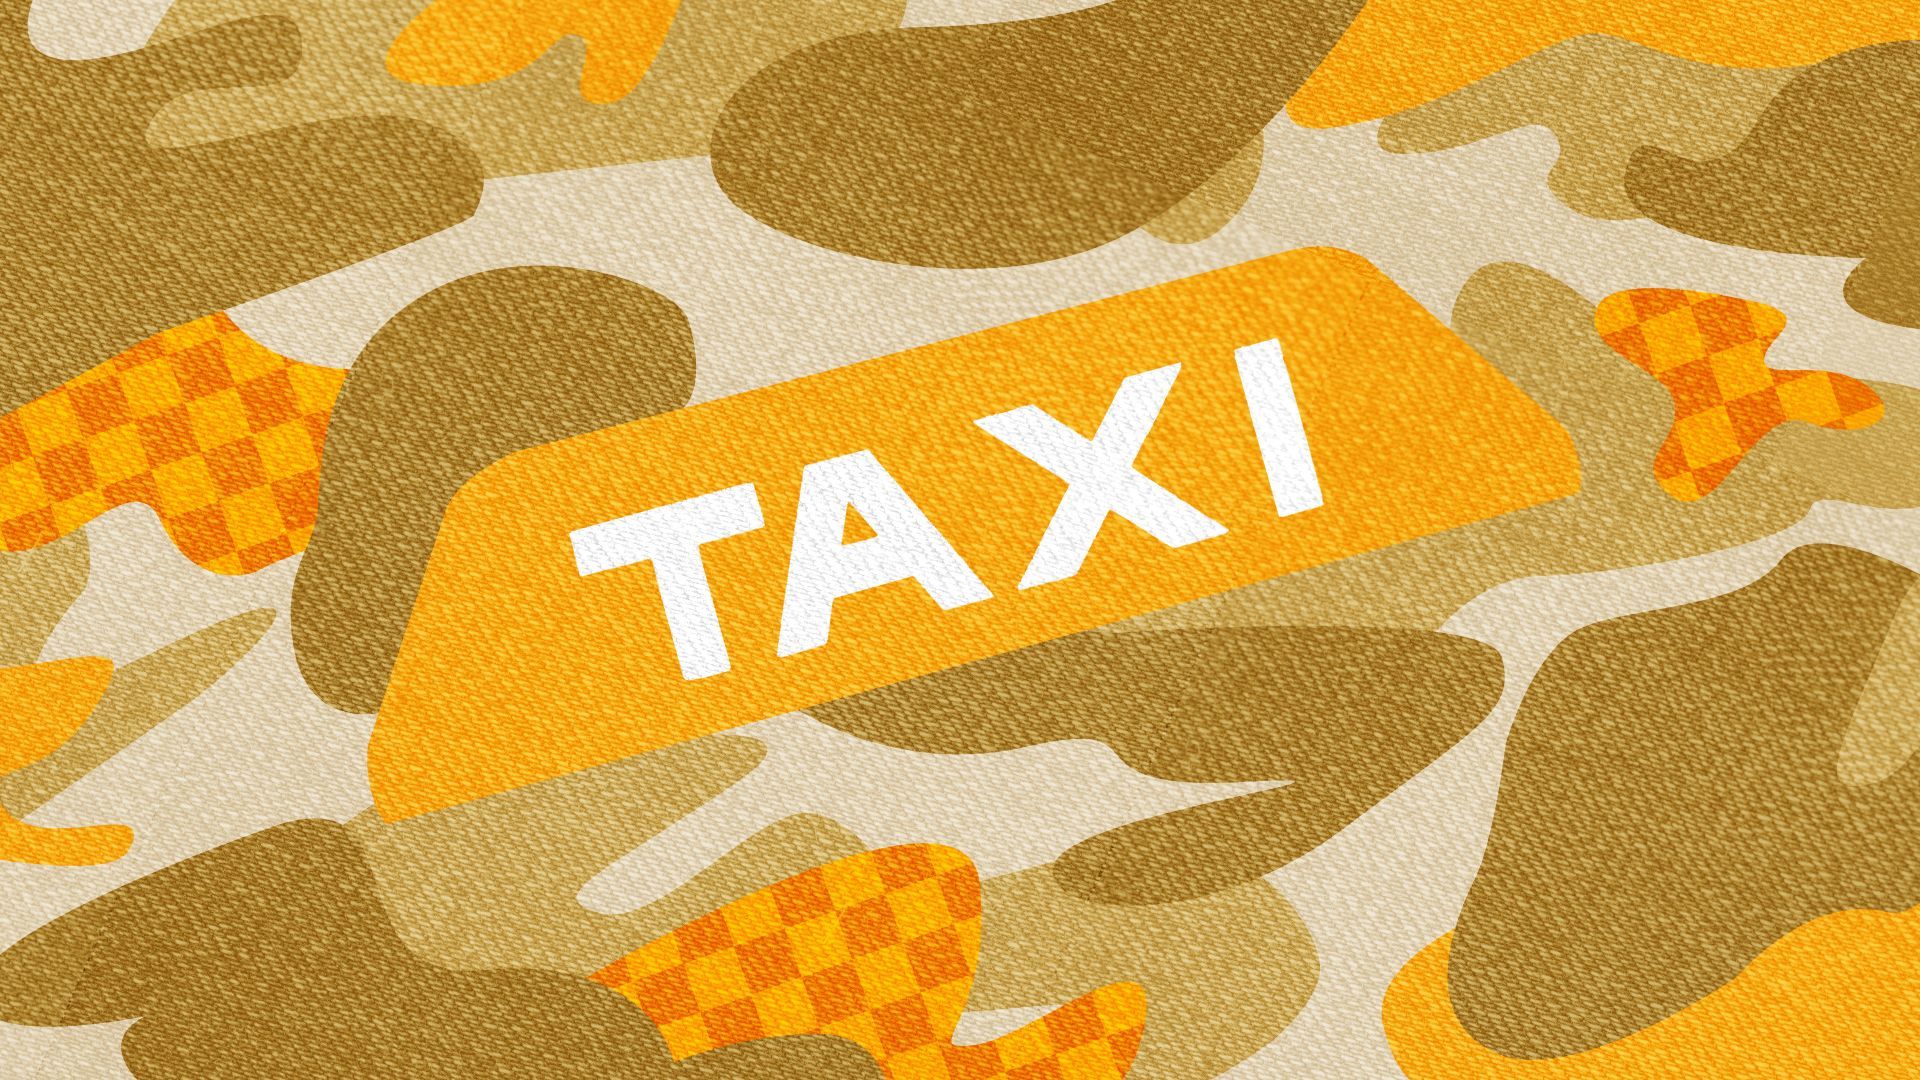 Illustration of a yellow and tan camouflage pattern with the central shape resembling a taxi sign, and with taxi checkers included throughout the pattern